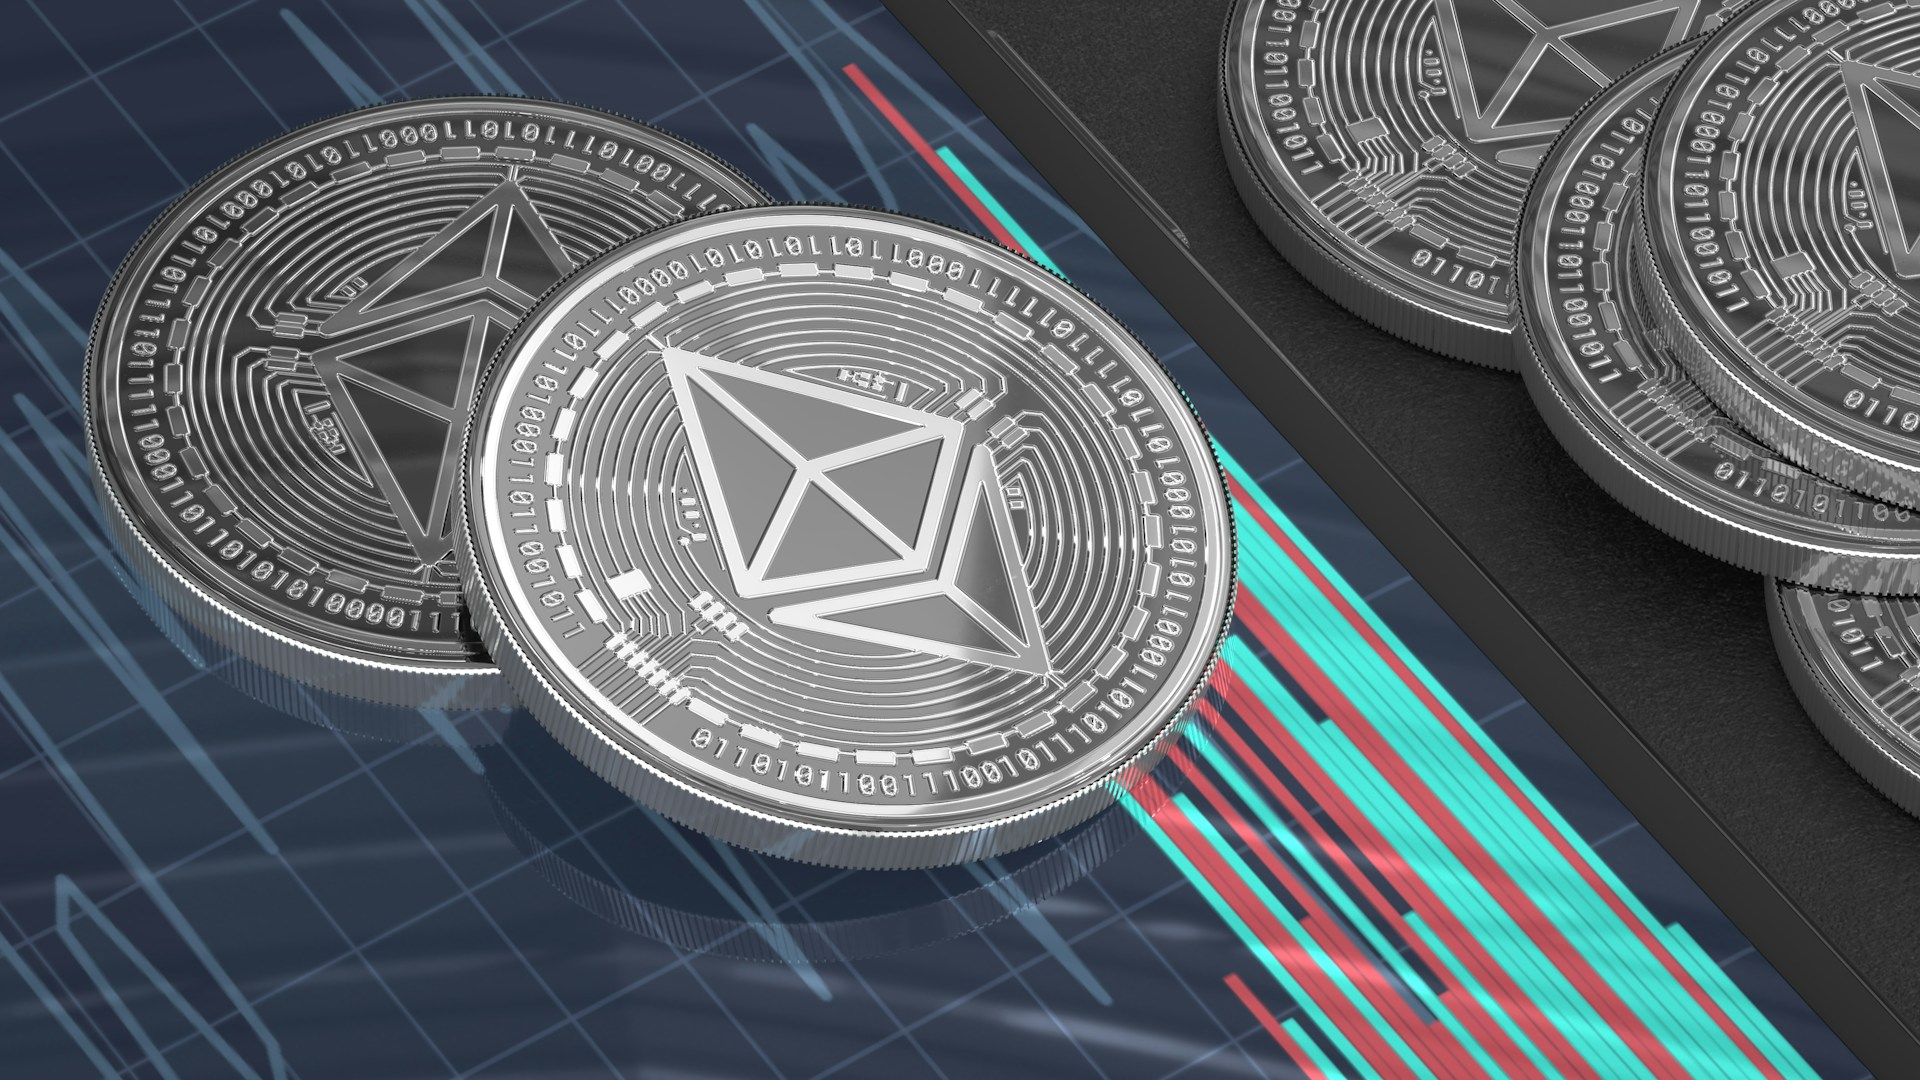 The SEC approved applications for spot Ether ETFs from multiple major issuers, marking a crypto milestone by allowing mainstream investment products tracking the second-biggest cryptocurrency.